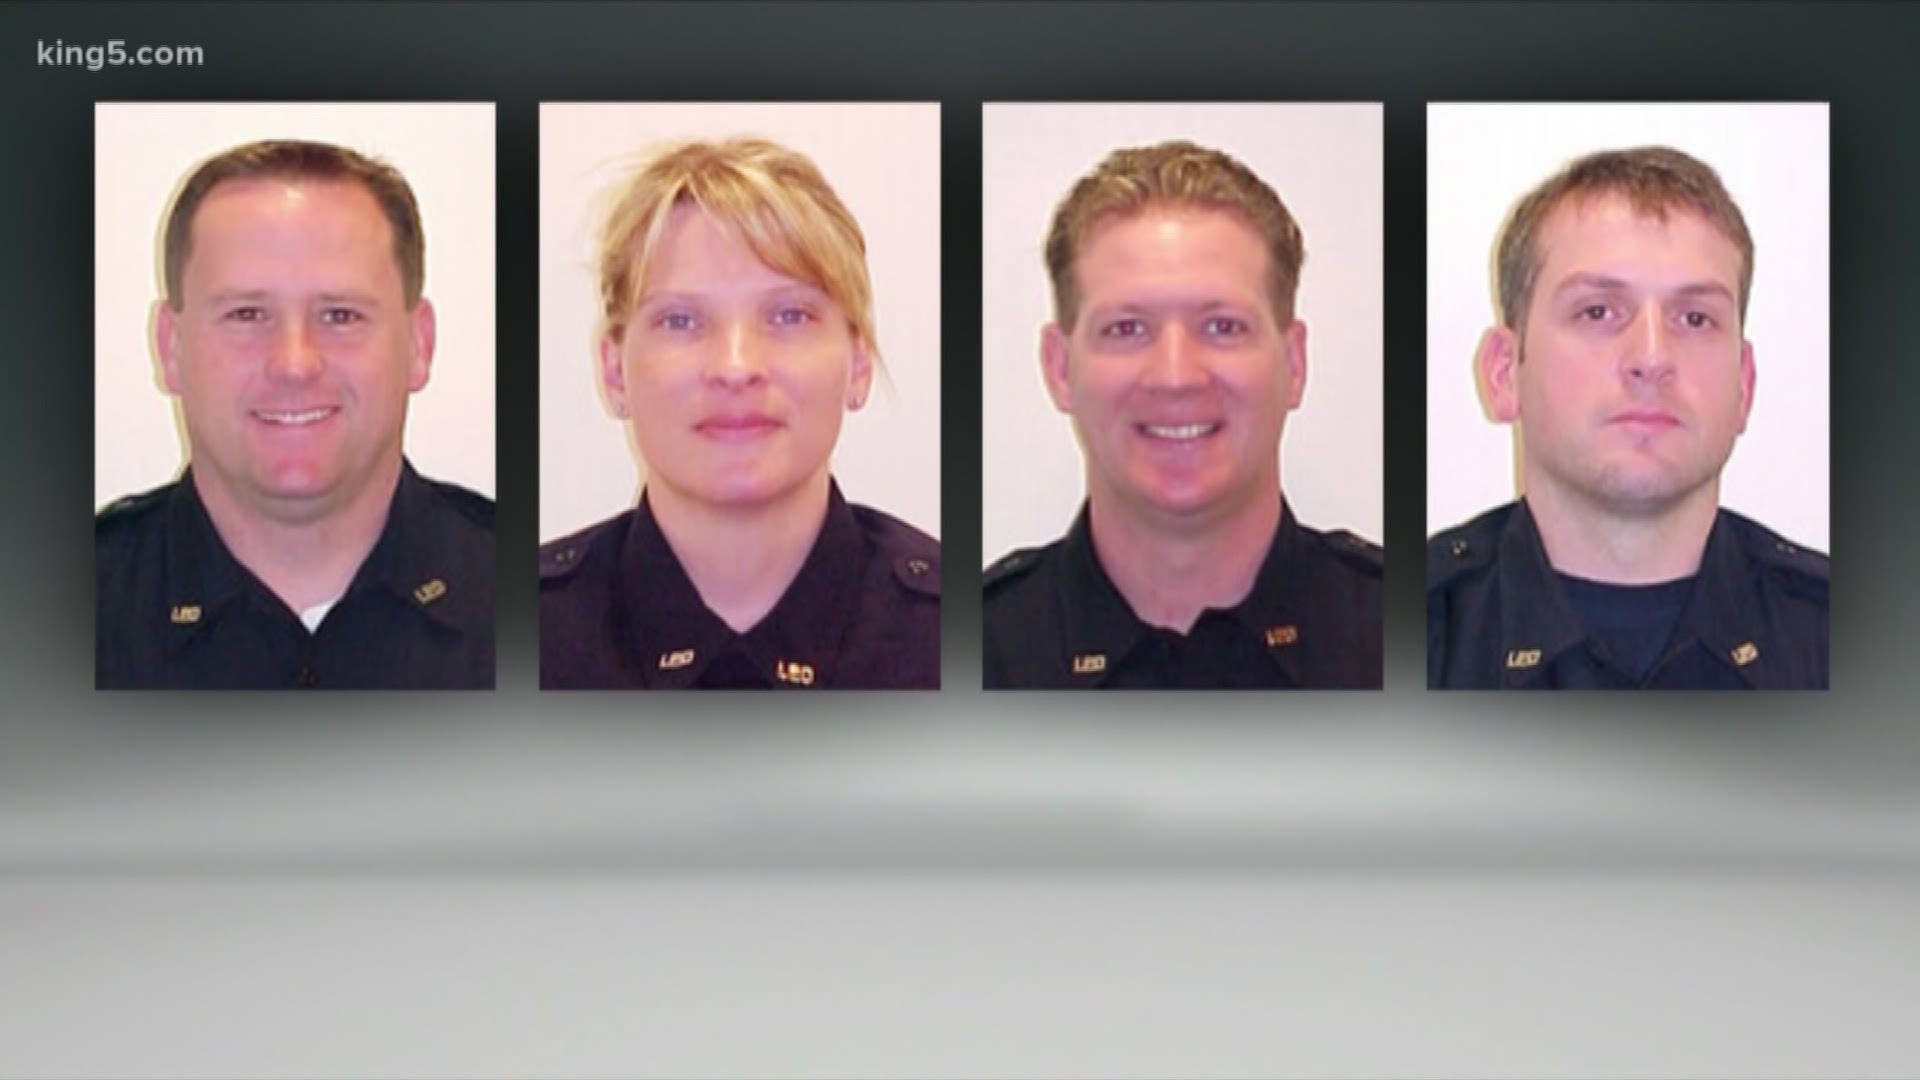 Four Lakewood police officers were gunned down in a coffee shop in 2009. Annually, Lakewood PD holds a food and blood drive to honor them by helping the community.